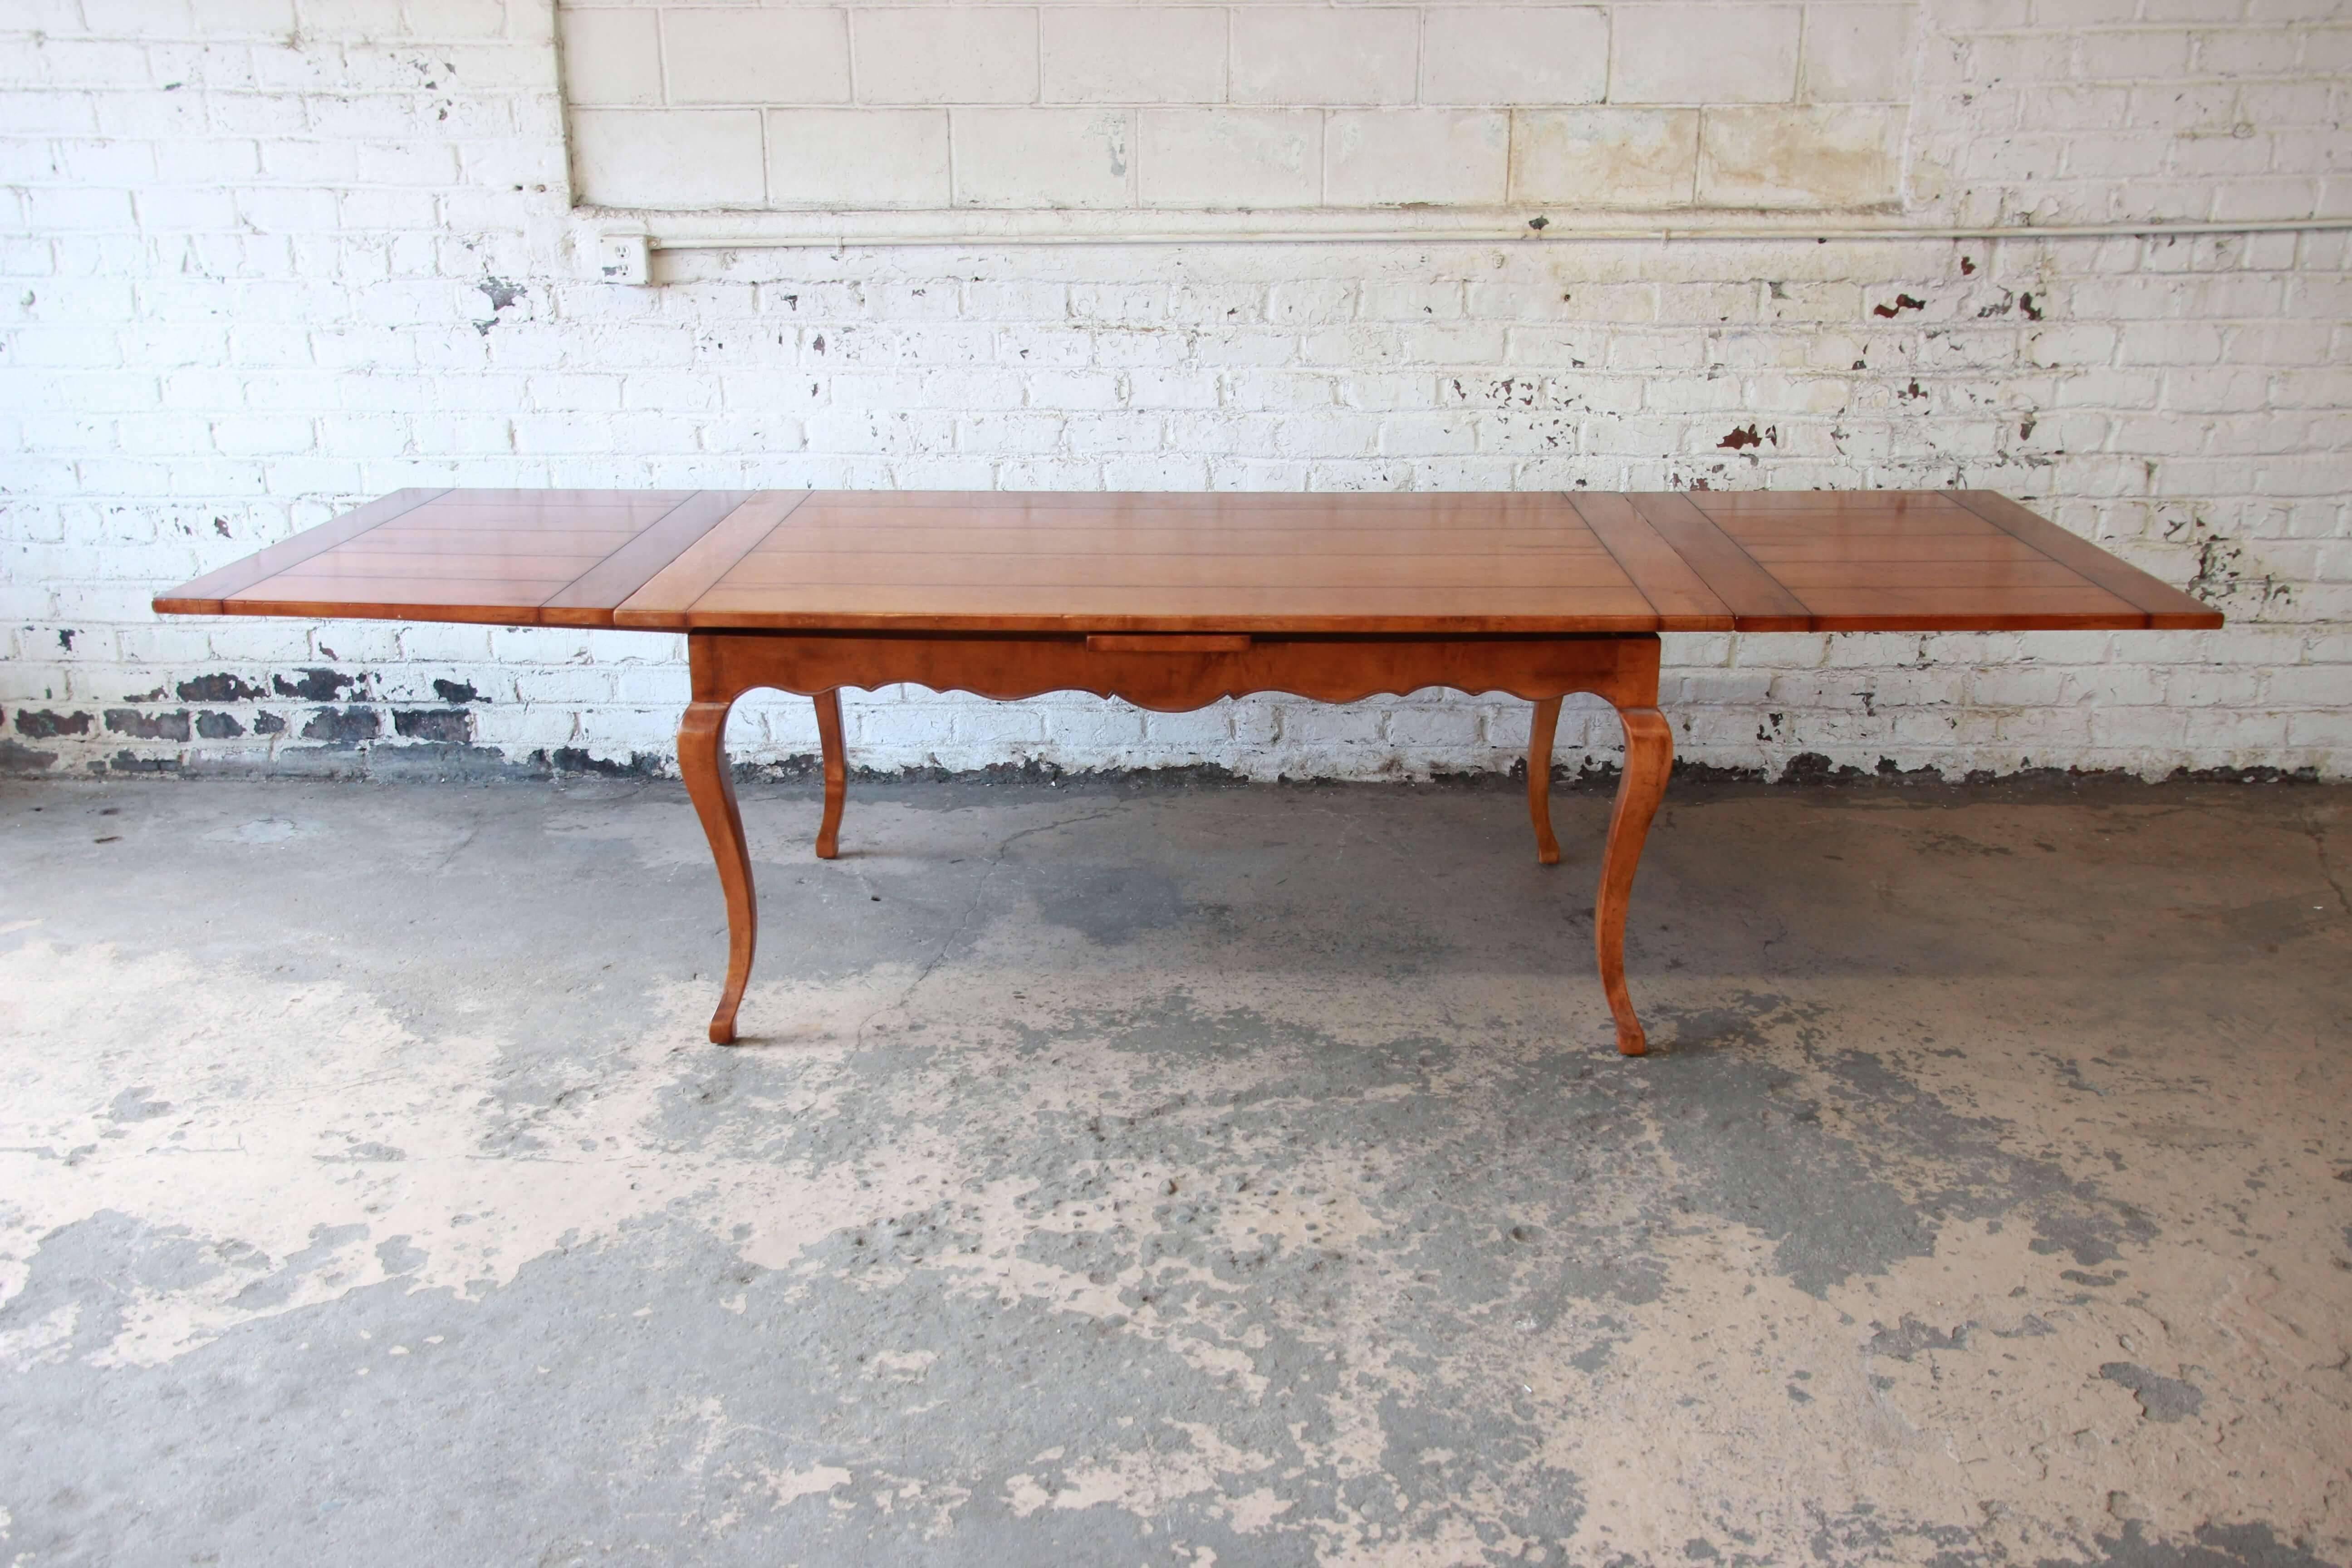 Offering a beautiful vintage solid maple extension dining table by Baker Furniture's Milling Road division. The table features a designed distressed look with French legs and apron. The two leaves are a refectory leaves and are stored underneath the